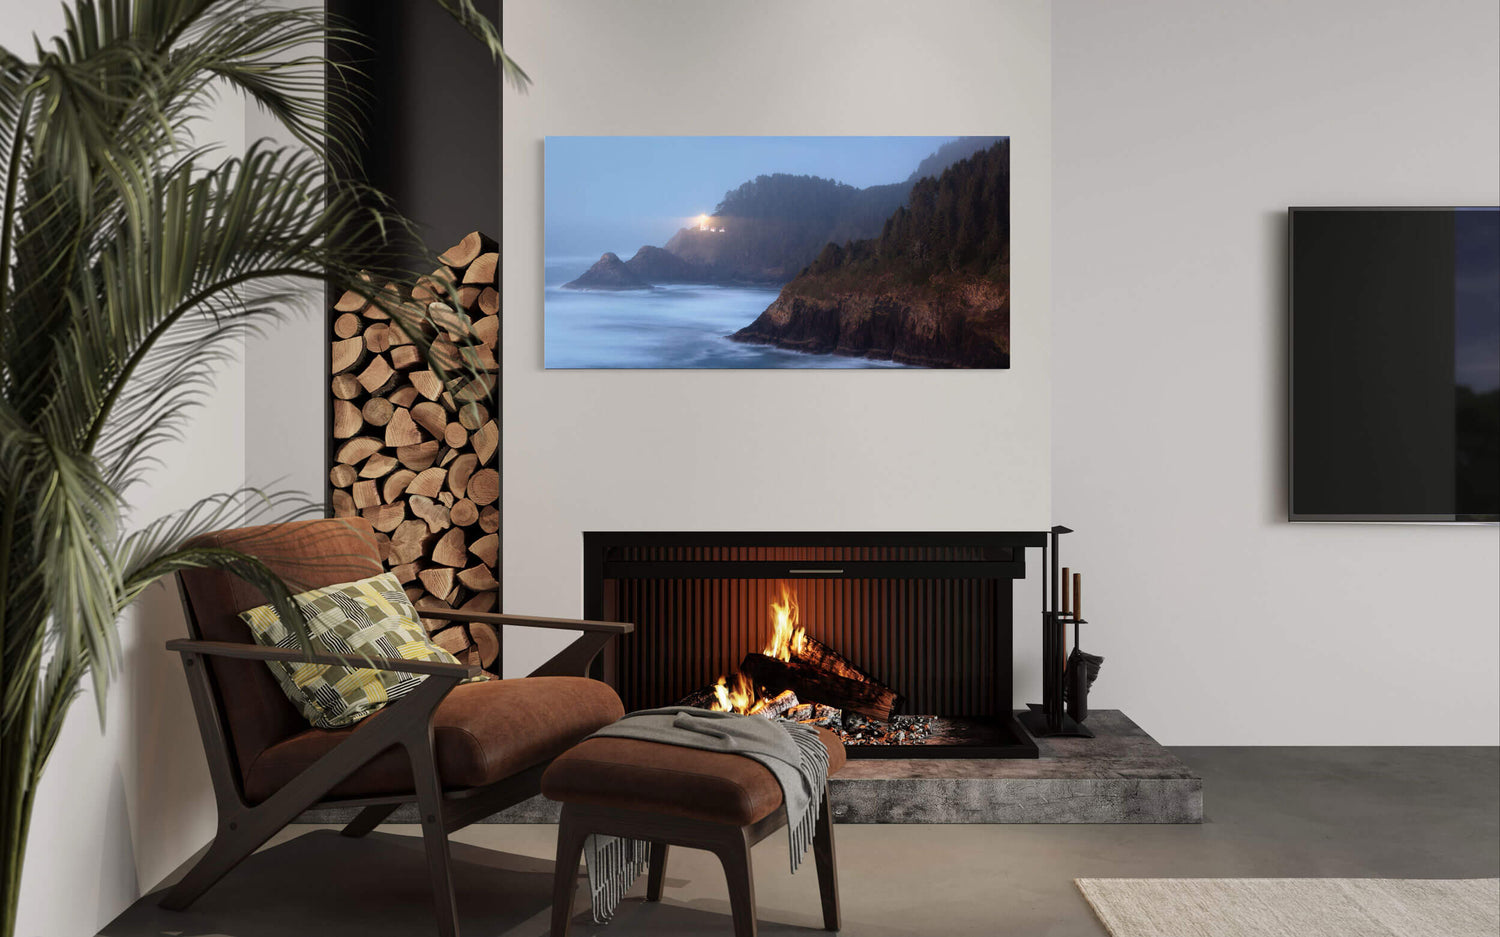 A lighthouse picture of Heceta Head on the Oregon Coast hangs in a living room.